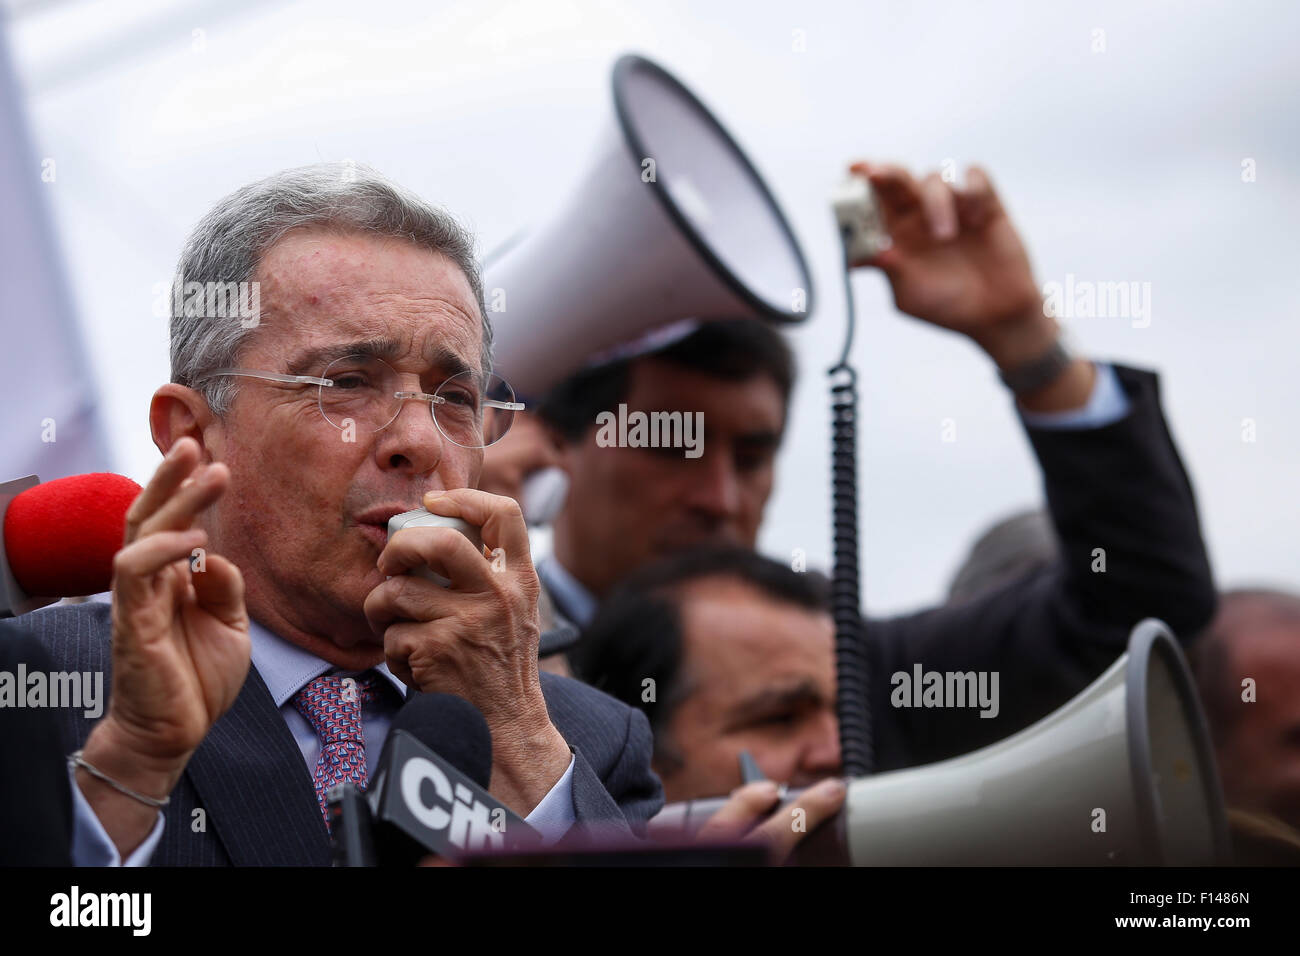 Bogota, Colombia. 26th Aug, 2015. Former Colombian President and Senator Alvaro Uribe takes part in a sit-in in front of the Venzuelan consulate in Bogota, Colombia, on Aug. 26, 2015. According to local press, Uribe headed for Wednesday a sit-in in the Venezuelan consulate to demonstrate for the crisis generated by the closure of the border between Colombia and Venezuela and to protest against the treatment given to Colombians in the border. © Mauricio Alvarado/COLPRENSA/Xinhua/Alamy Live News Stock Photo